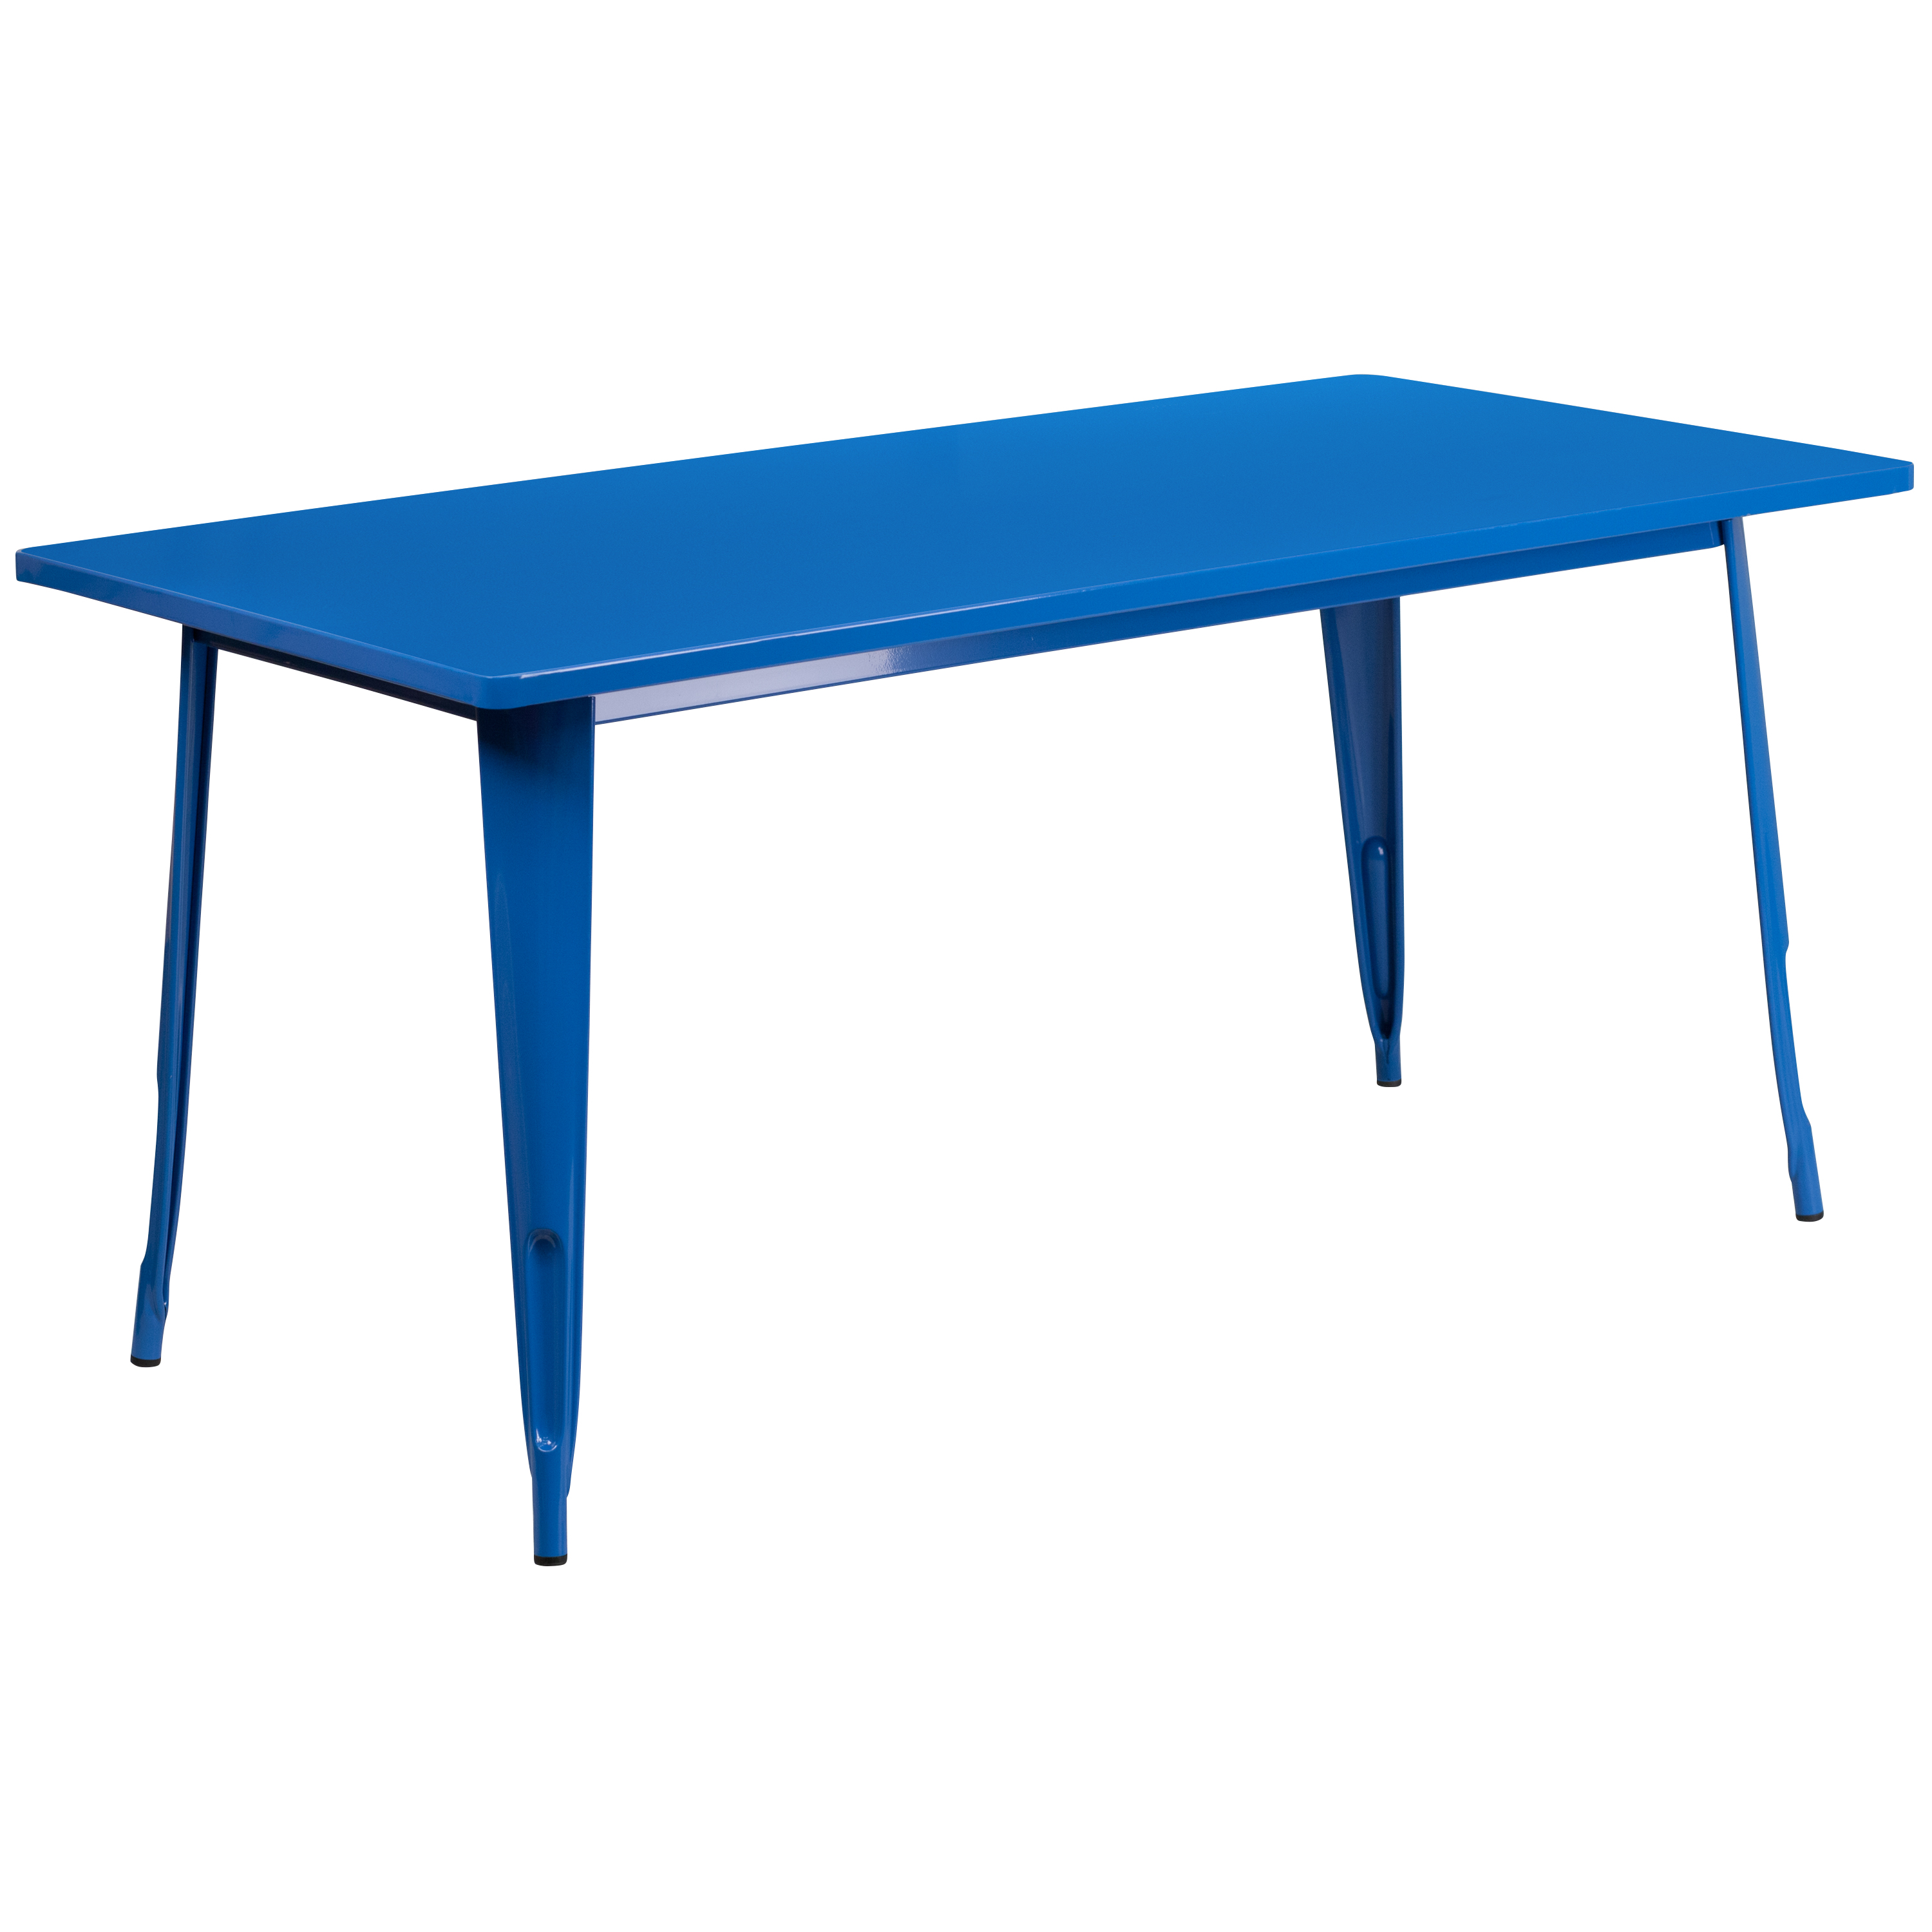 Emma + Oliver Commercial Grade Rectangular Blue Metal Indoor-Outdoor Table Set-6 Arm Chairs - image 4 of 5